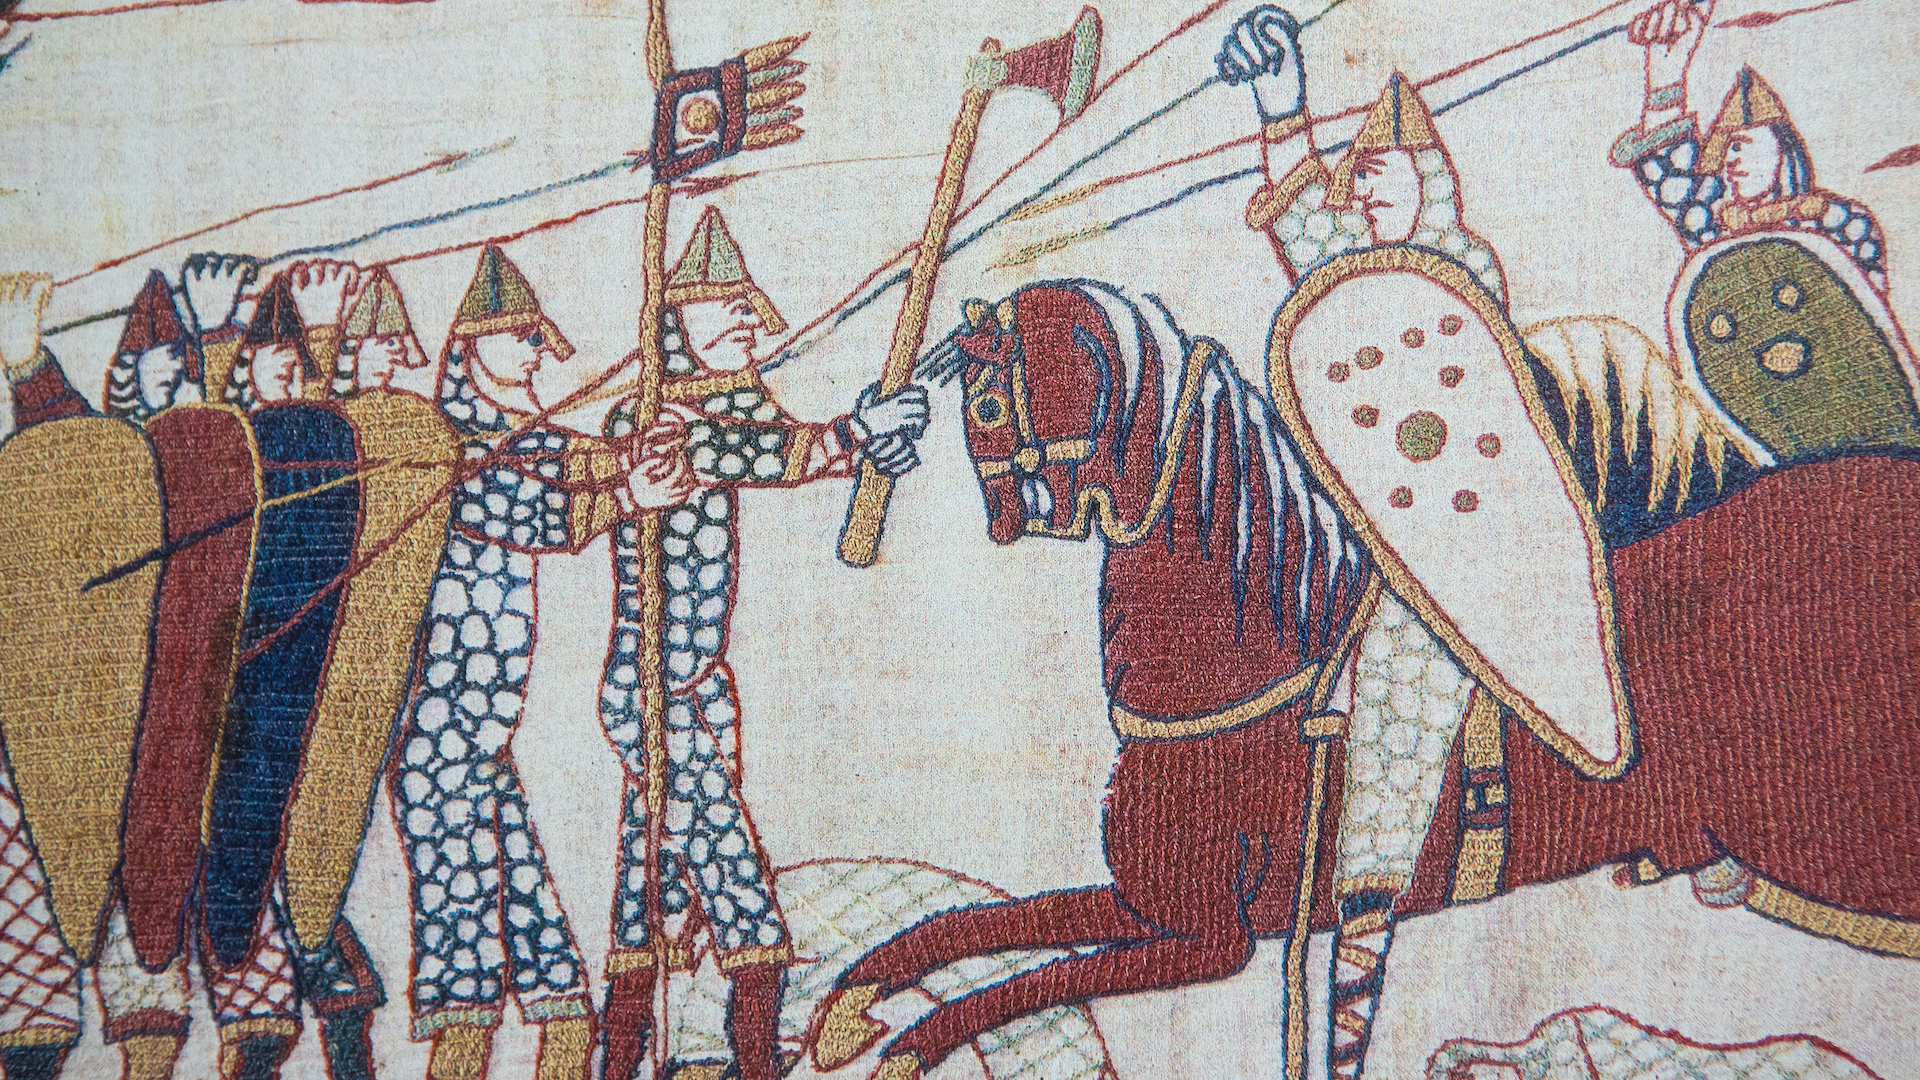 Detail of the Bayeux Tapestry, depicting the Battle of Hastings